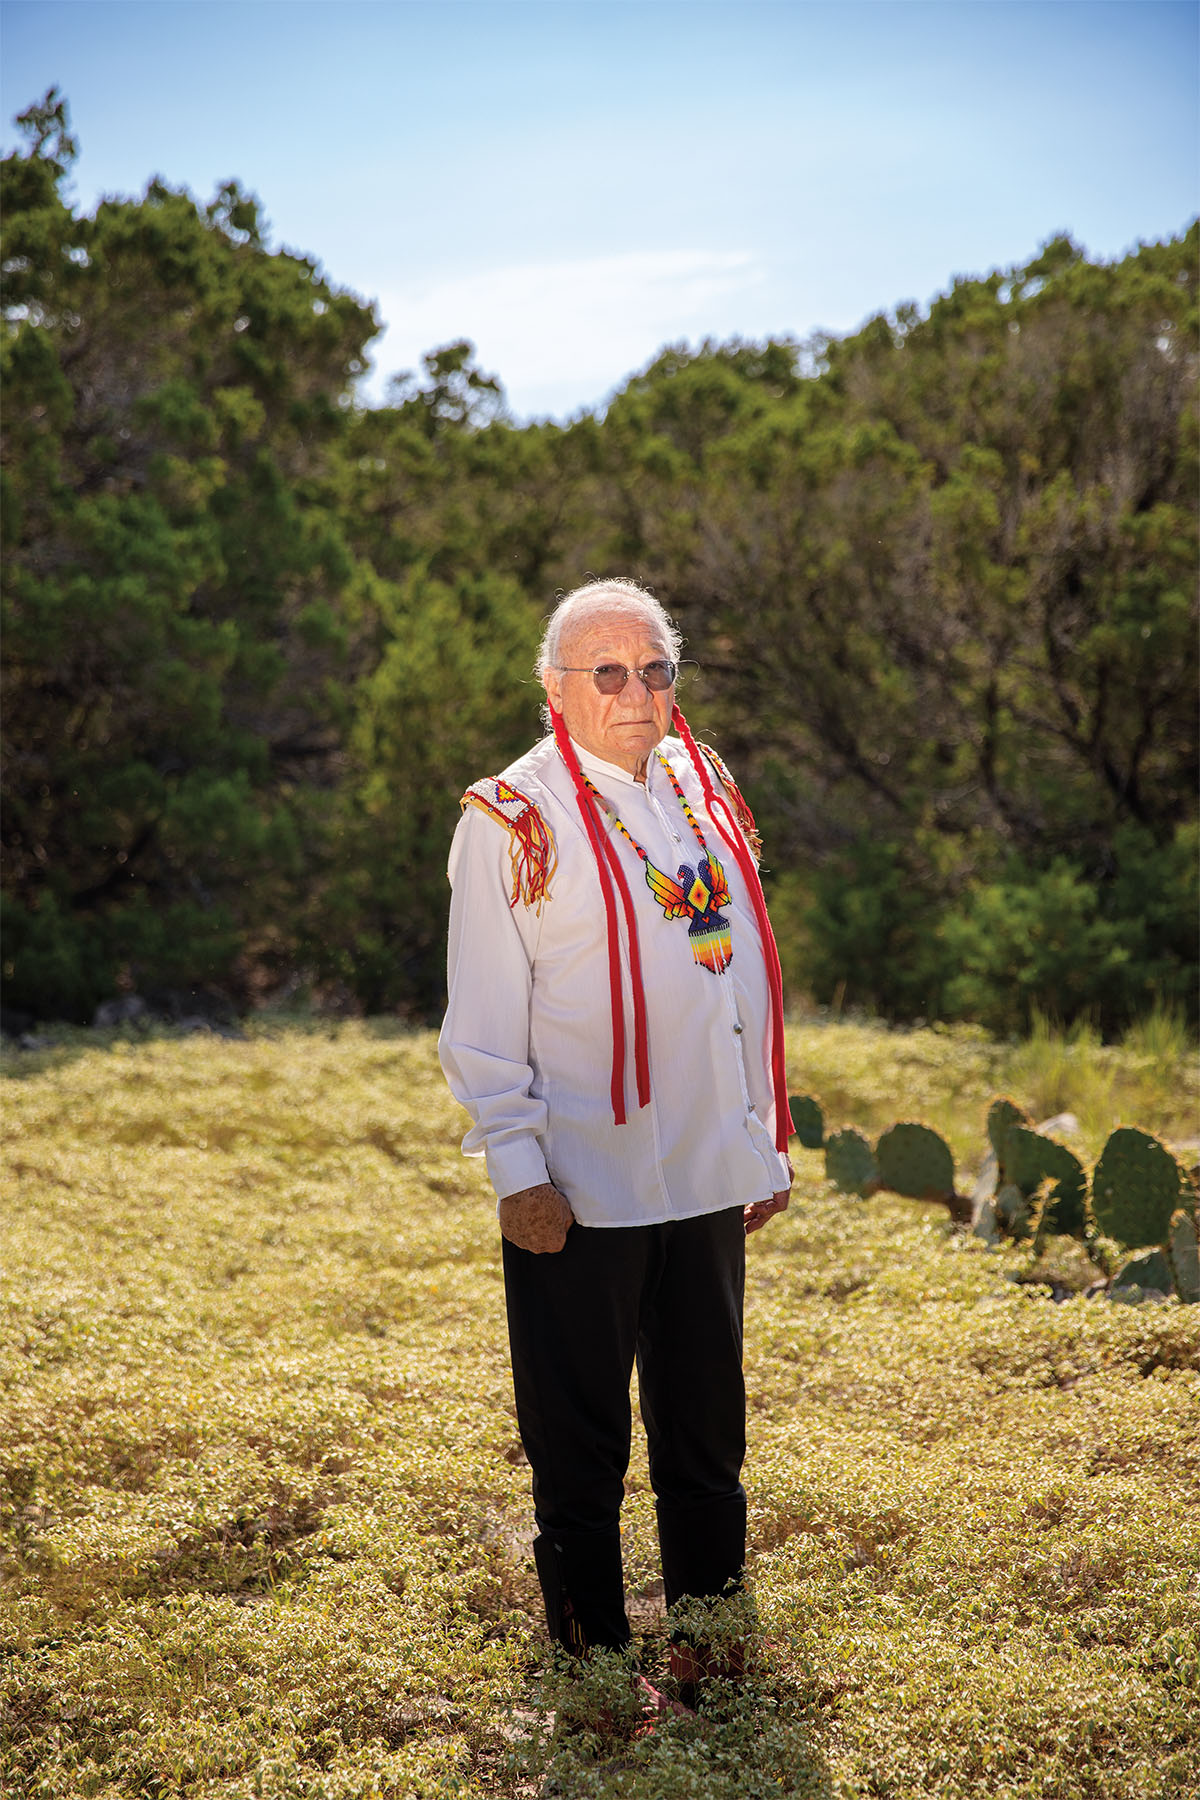 A man in traditional Native American wear, a colorful necklace and long red braids, stands in a field with prickly pear cactus